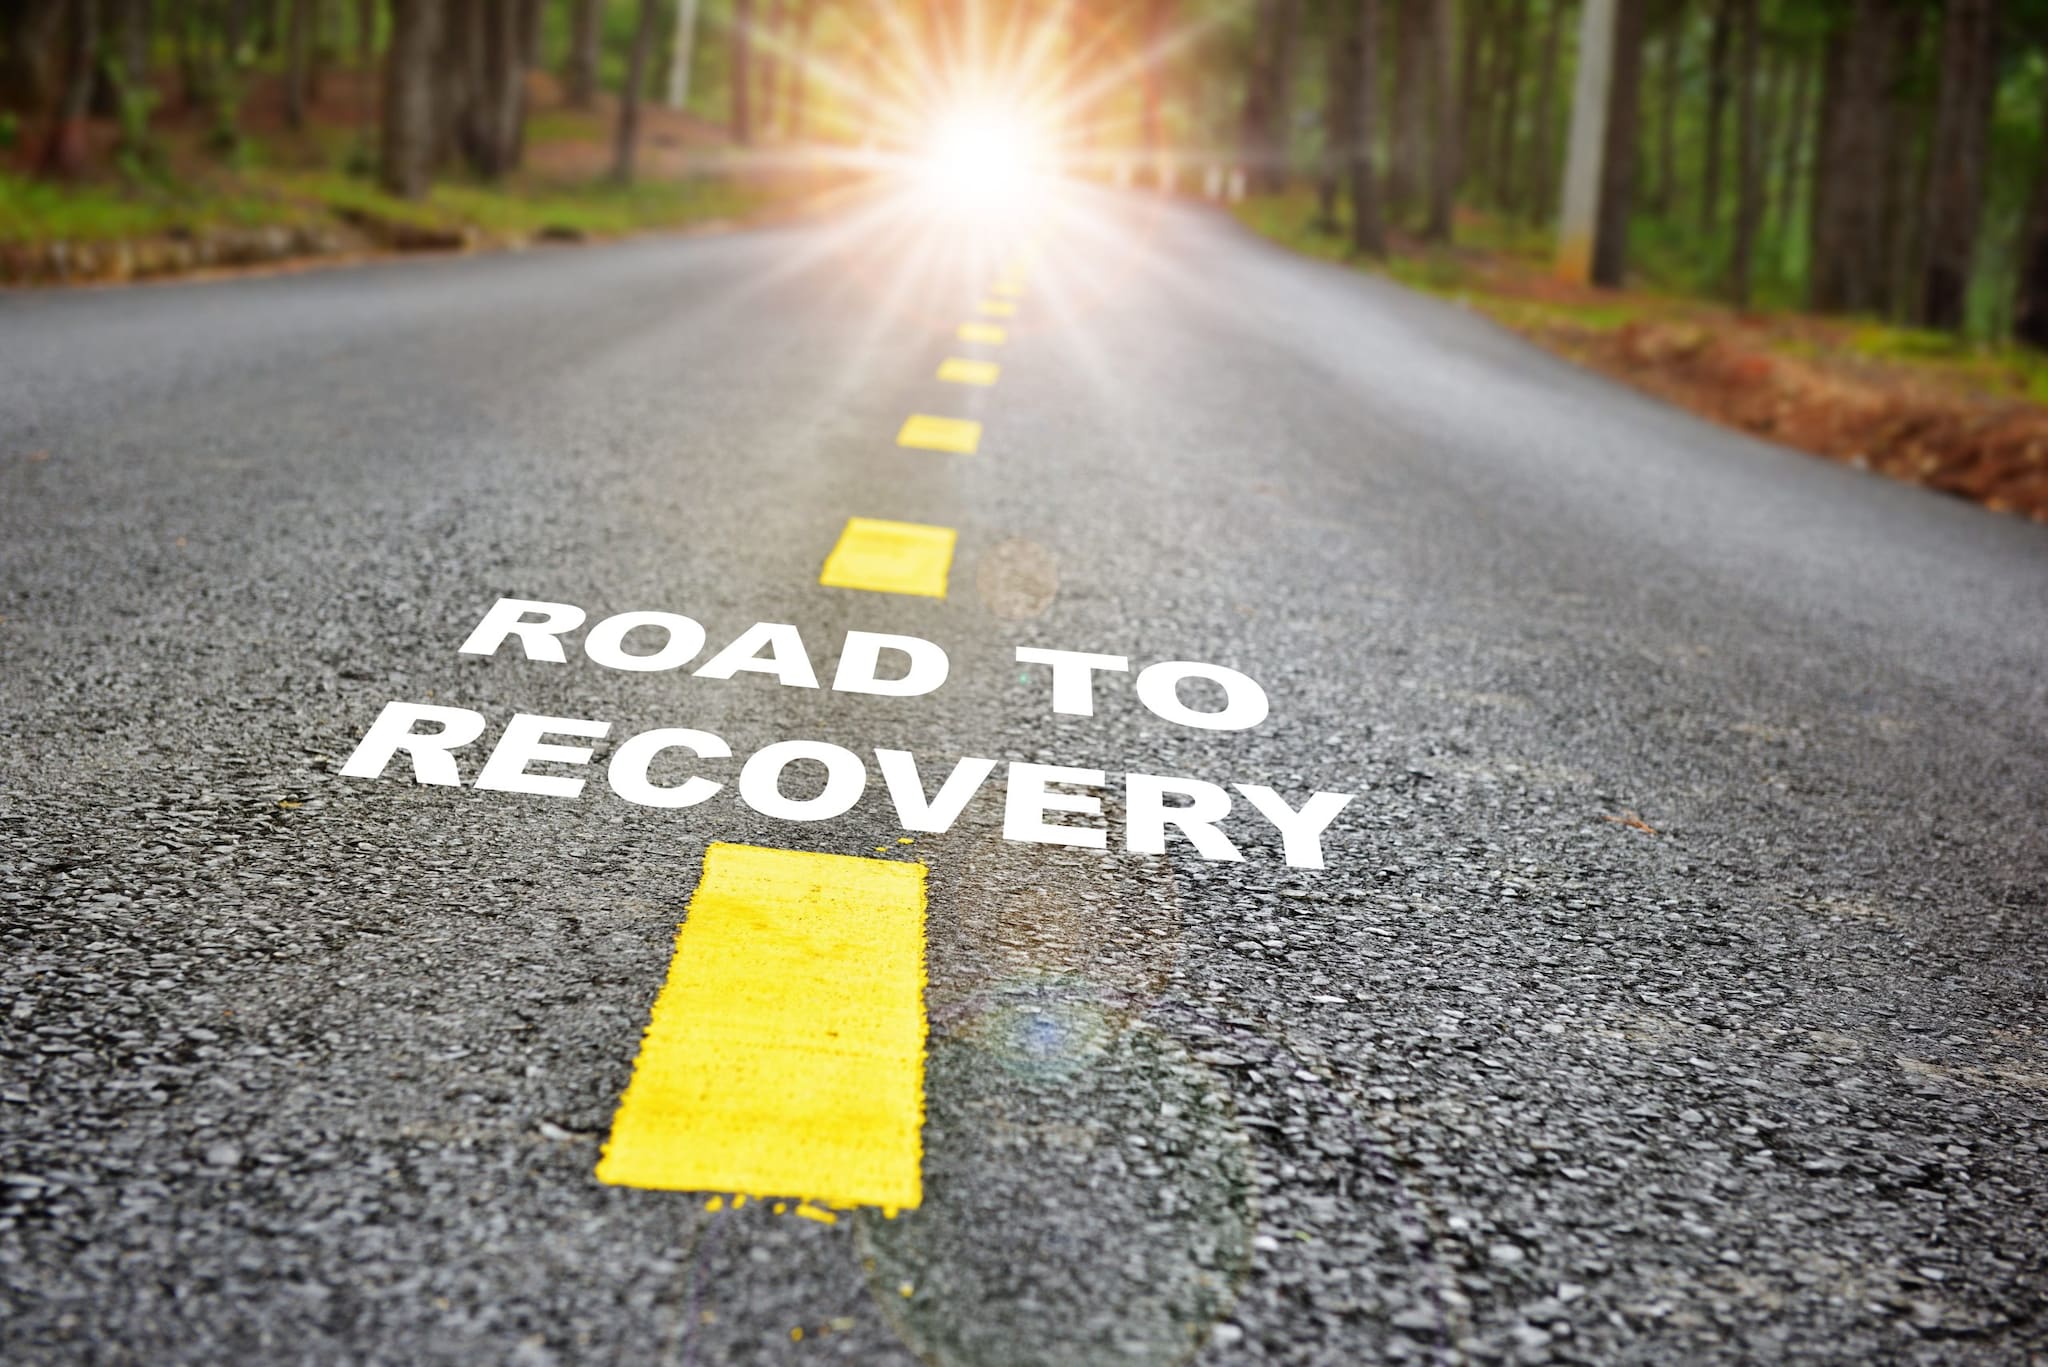 Road with dotted yellow line down the middle and the words "Road to recovery" written across.